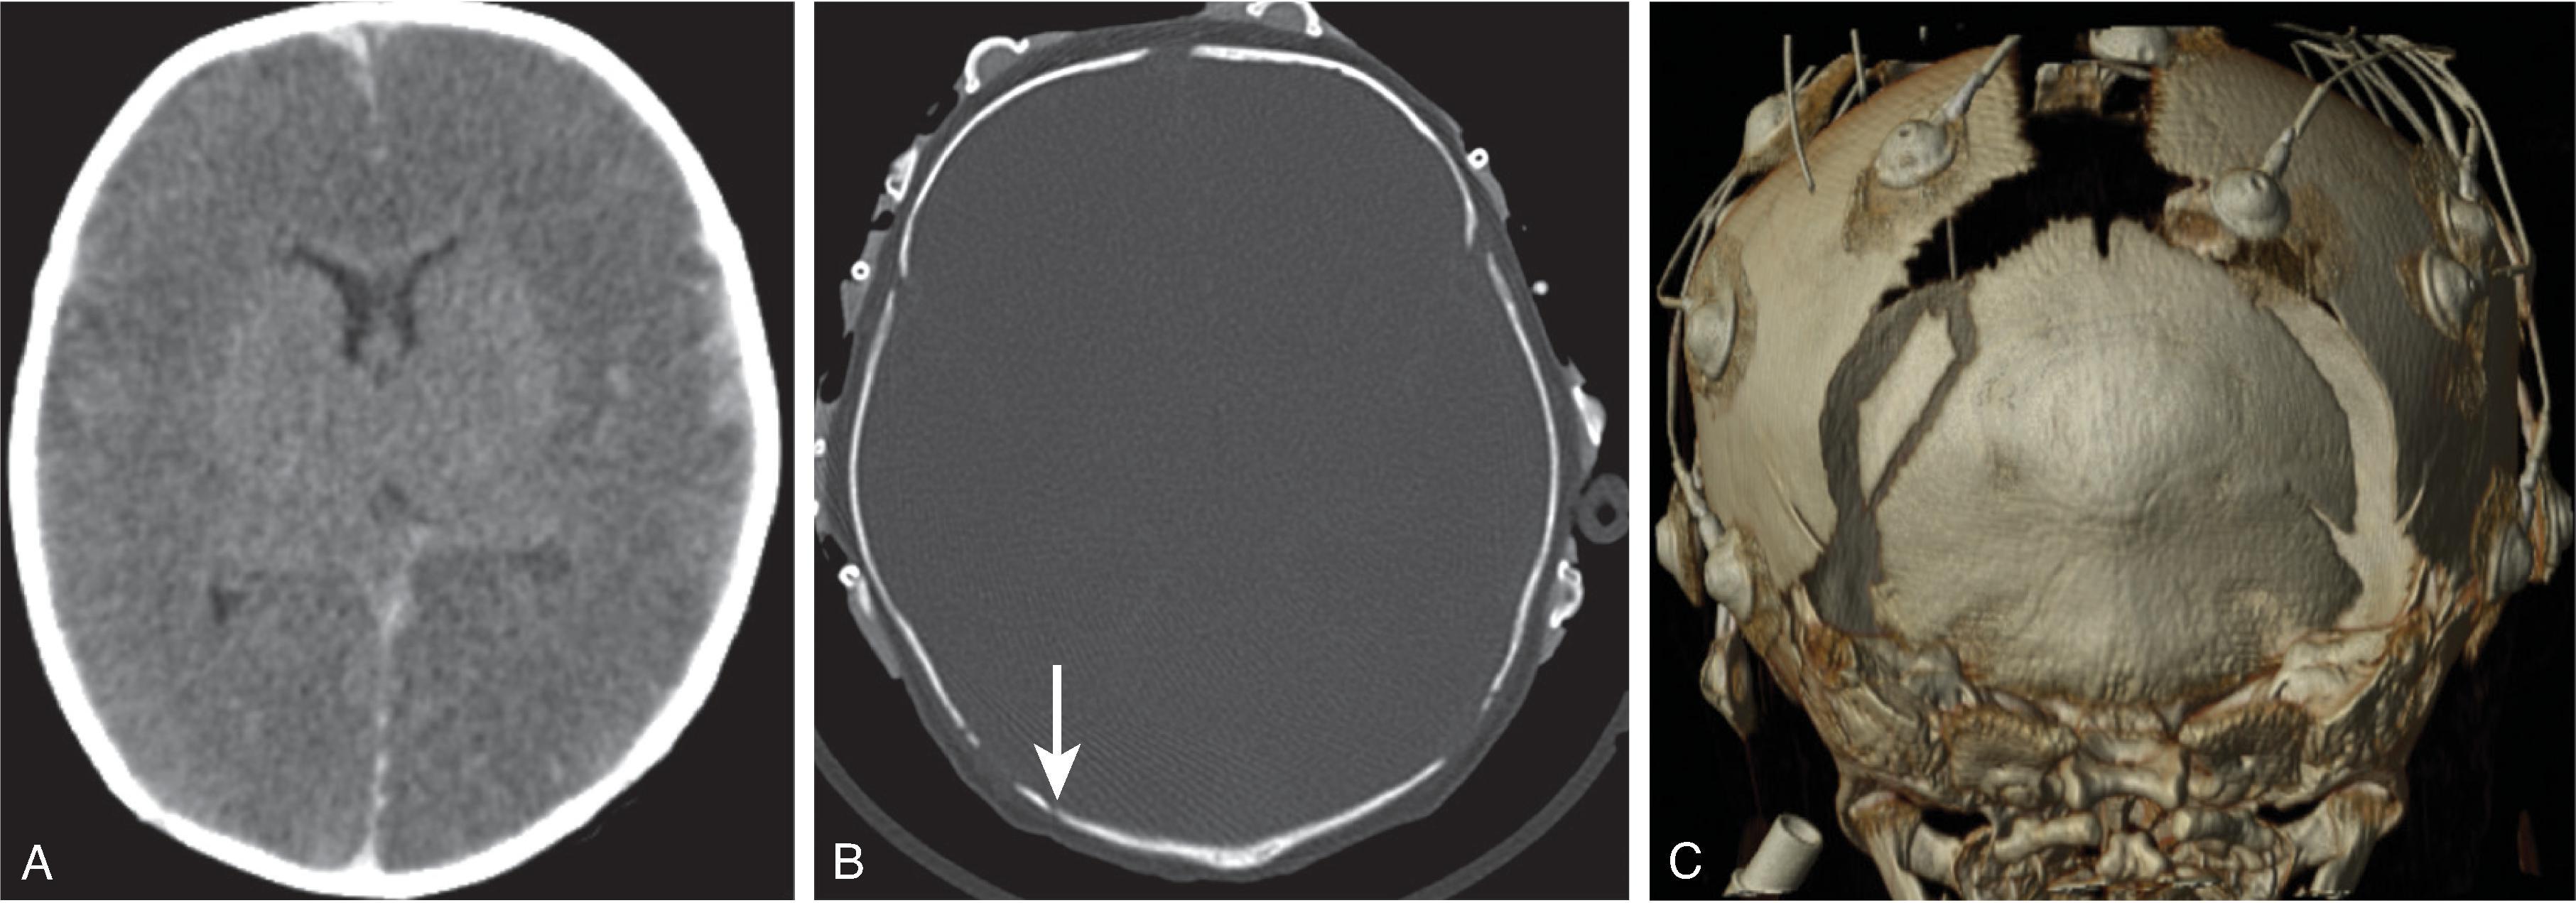 Fig. 10.18, Accessory Suture . (A and B) Axial CT images demonstrate large regions of parenchymal edema, hyperdensities in the subarachnoid spaces concerning for hemorrhage, and a lucency in the right side of the occipital bone concerning for a fracture ( arrow ). These findings were concerning for potential abusive head trauma. (C) 3D volumetric CT image, however, shows the sutures are widened and the right occipital lucency is a widened accessory suture. The infant was found to have bacterial meningitis. Autopsy confirmed an accessory suture.